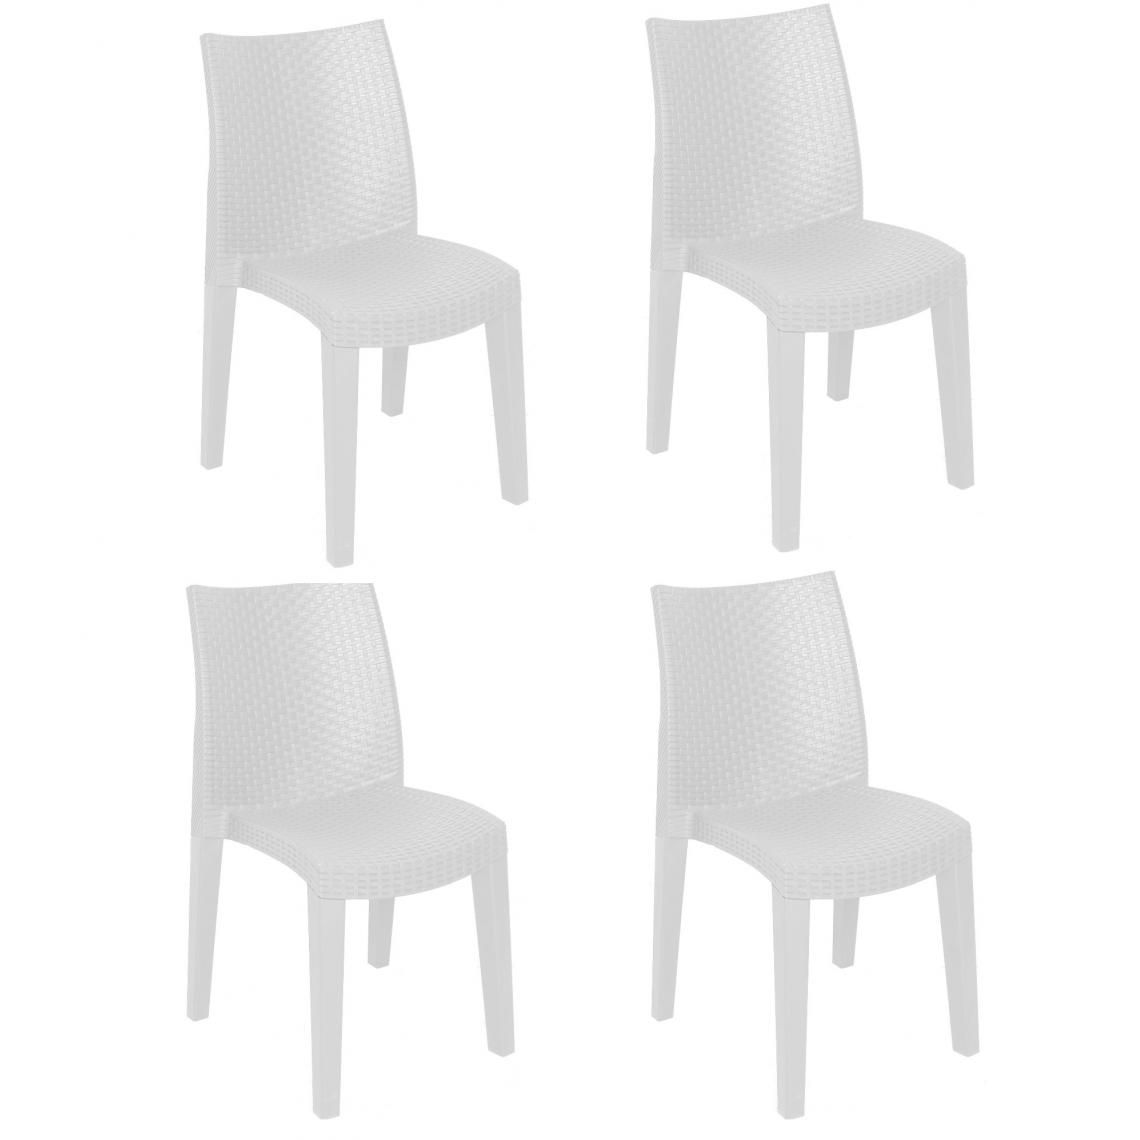 Alter - Ensemble de 4 chaises empilables effet rotin, Made in Italy, couleur blanche, Dimensions 48 x 86 x 55 cm - Chaises